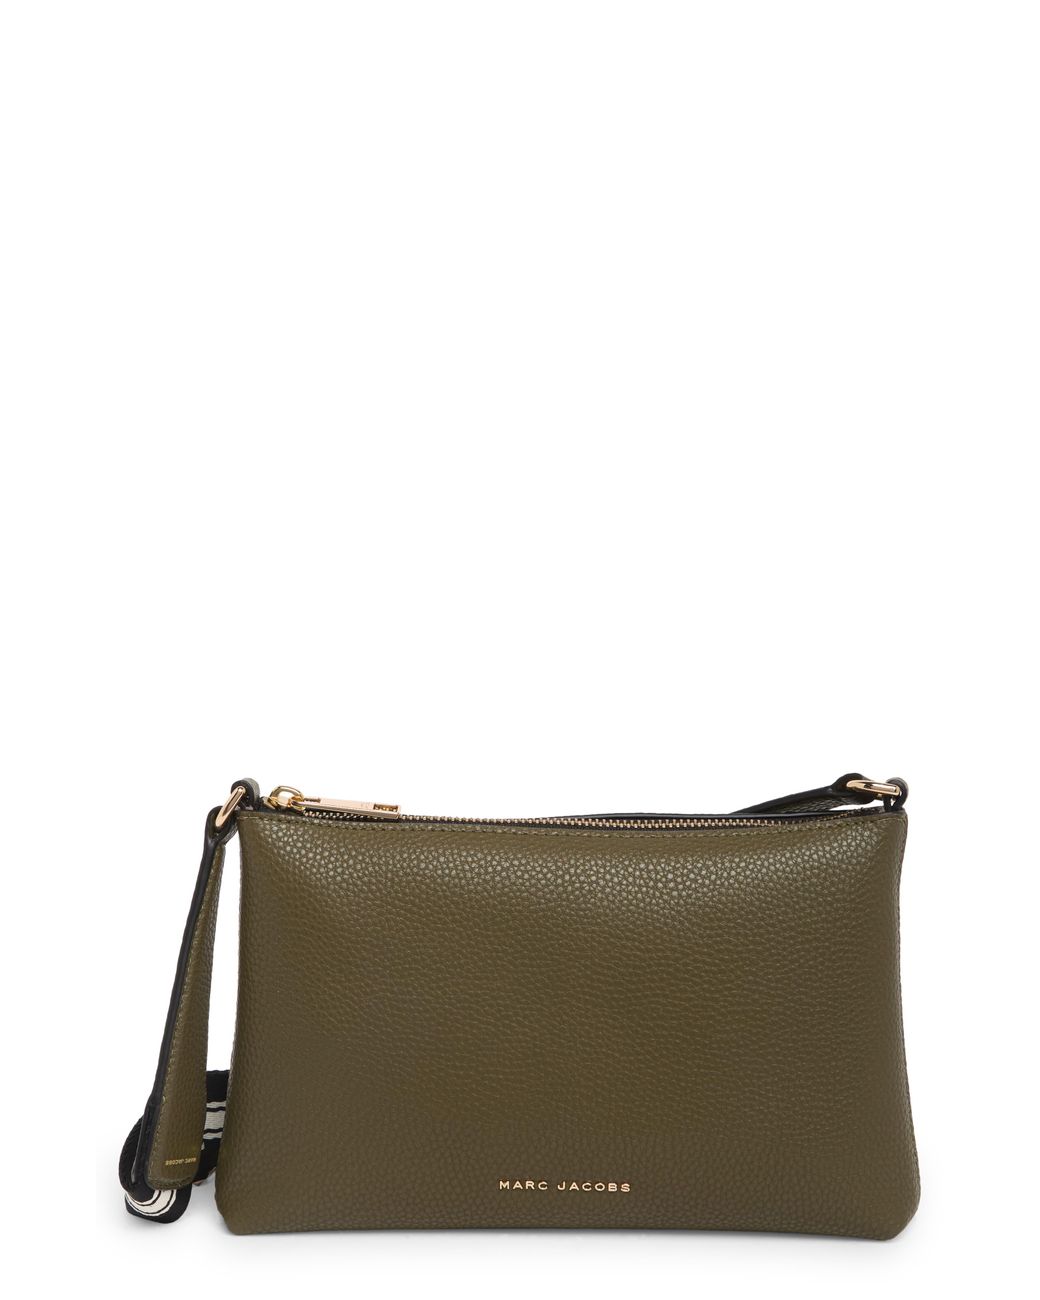 Marc Jacobs The Cosmo Leather Crossbody Bag in Gray | Lyst